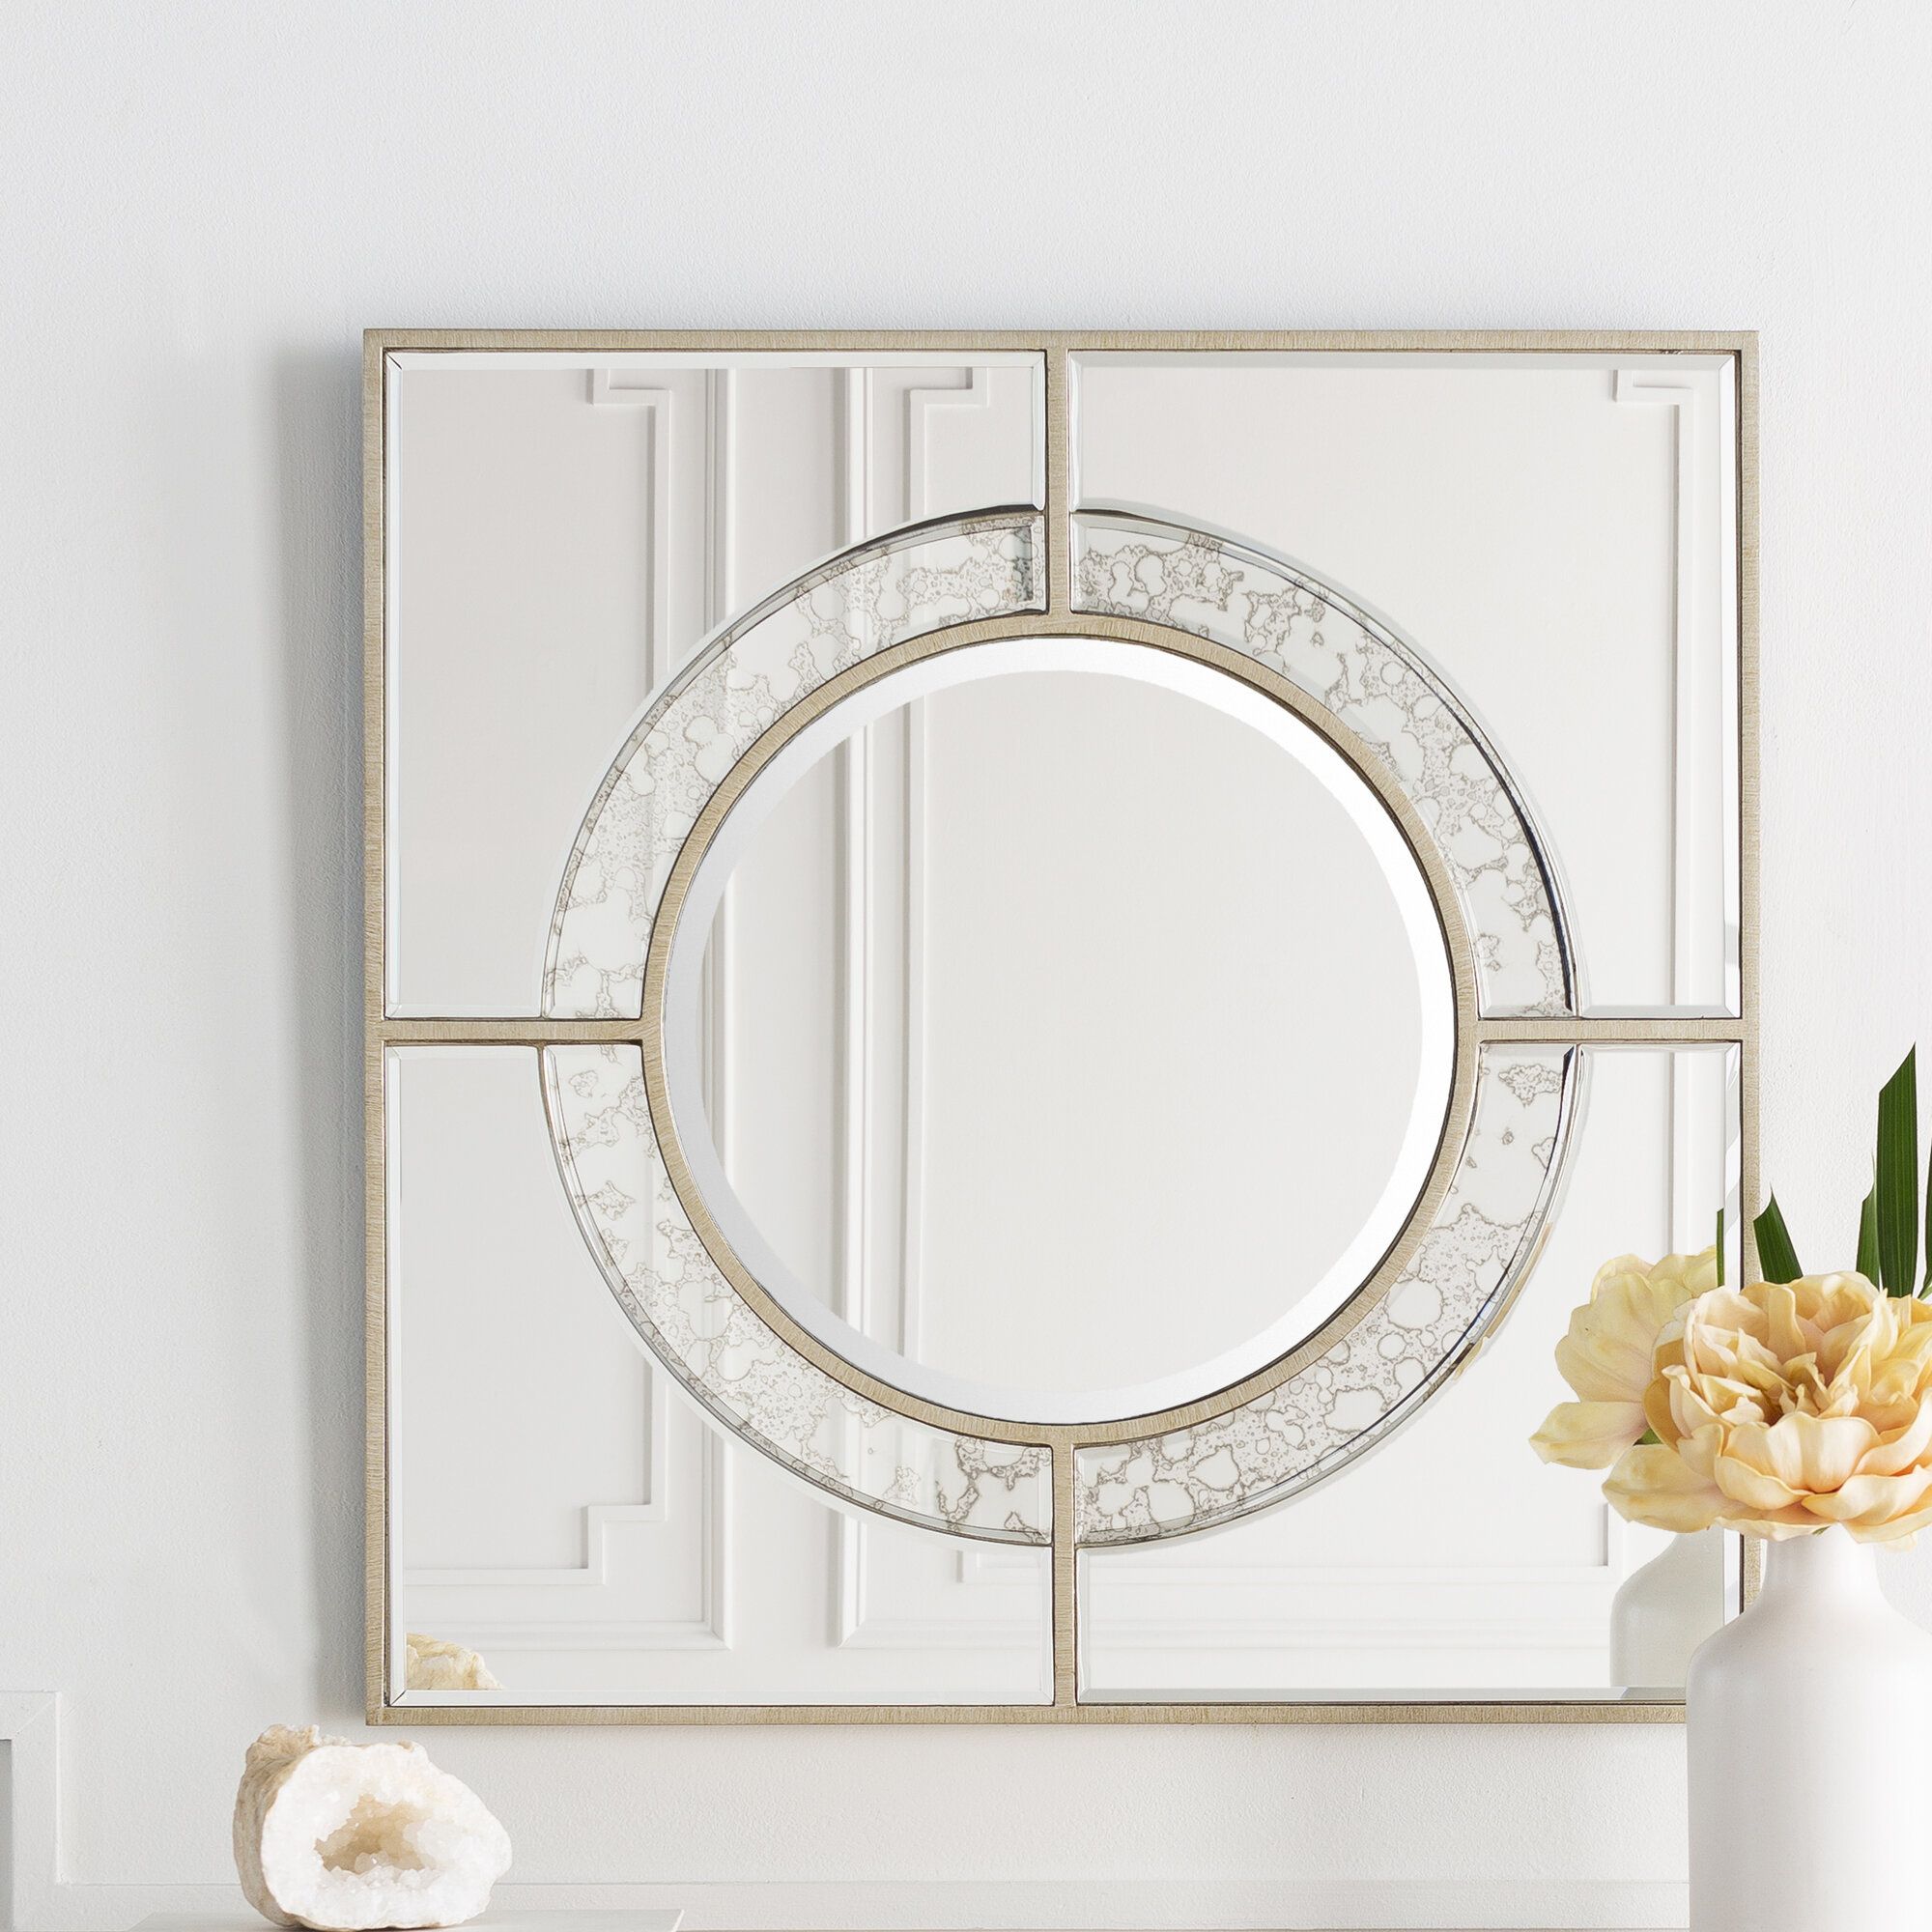 Darby Home Co Square Brown Traditional Beveled Wall Mirror | Ebay Intended For Tifton Traditional Beveled Accent Mirrors (View 7 of 15)